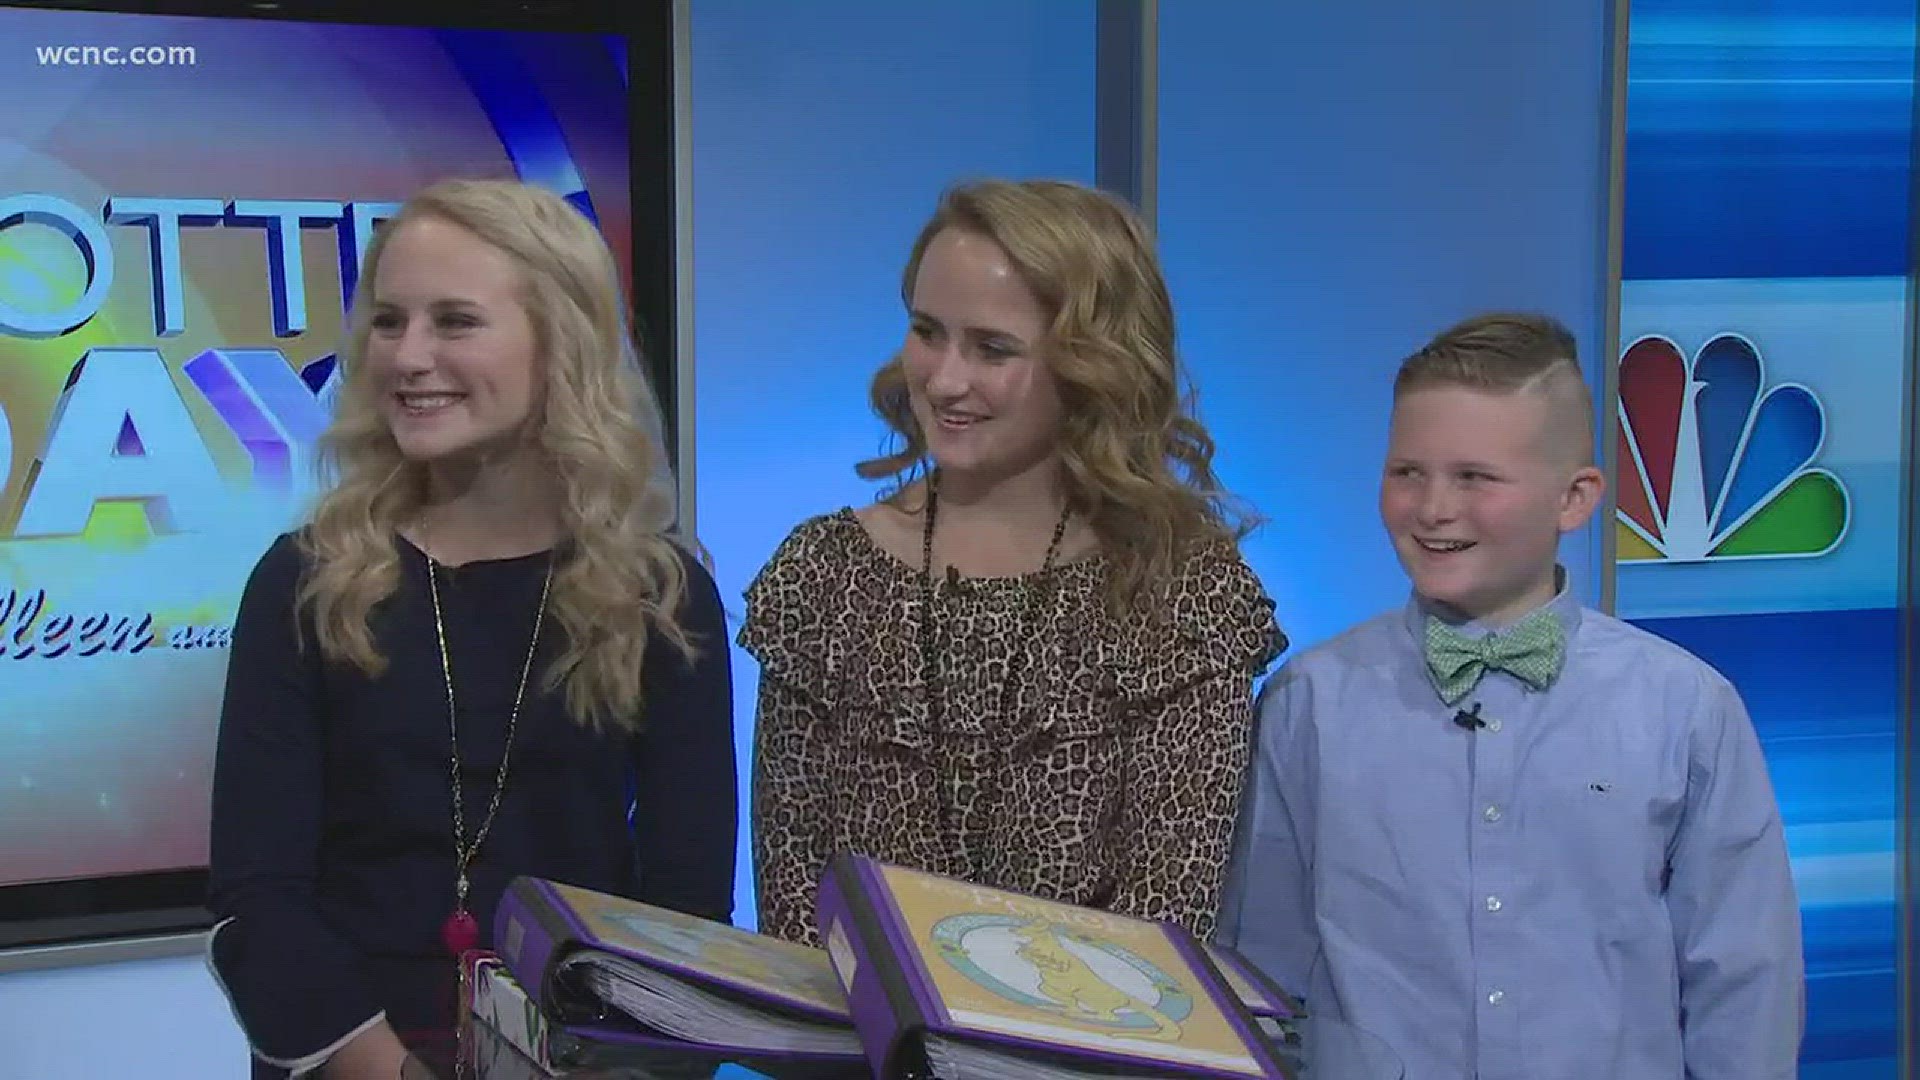 Three local siblings have made it their mission to help sick kids.